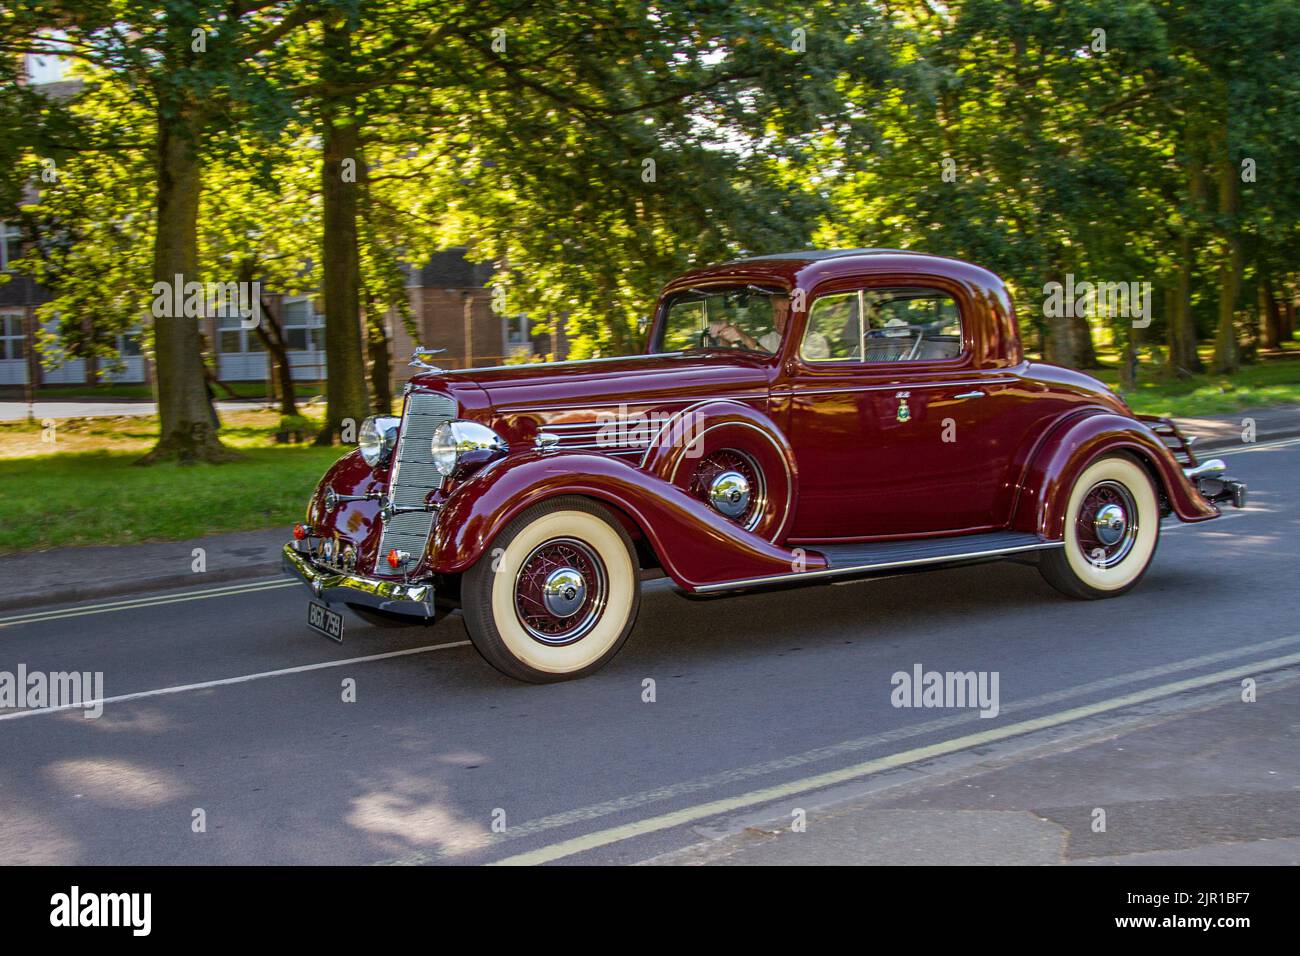 1934, 30s thirties, pre-war Maroon American BUICK Coupe 3900c petrol USA limousine; Vintage motors, and cars on display at the 13th Lytham Hall Summer Classic Car & Show, a Classic Vintage Collectible Transport Festival, Blackpool, UK Stock Photo